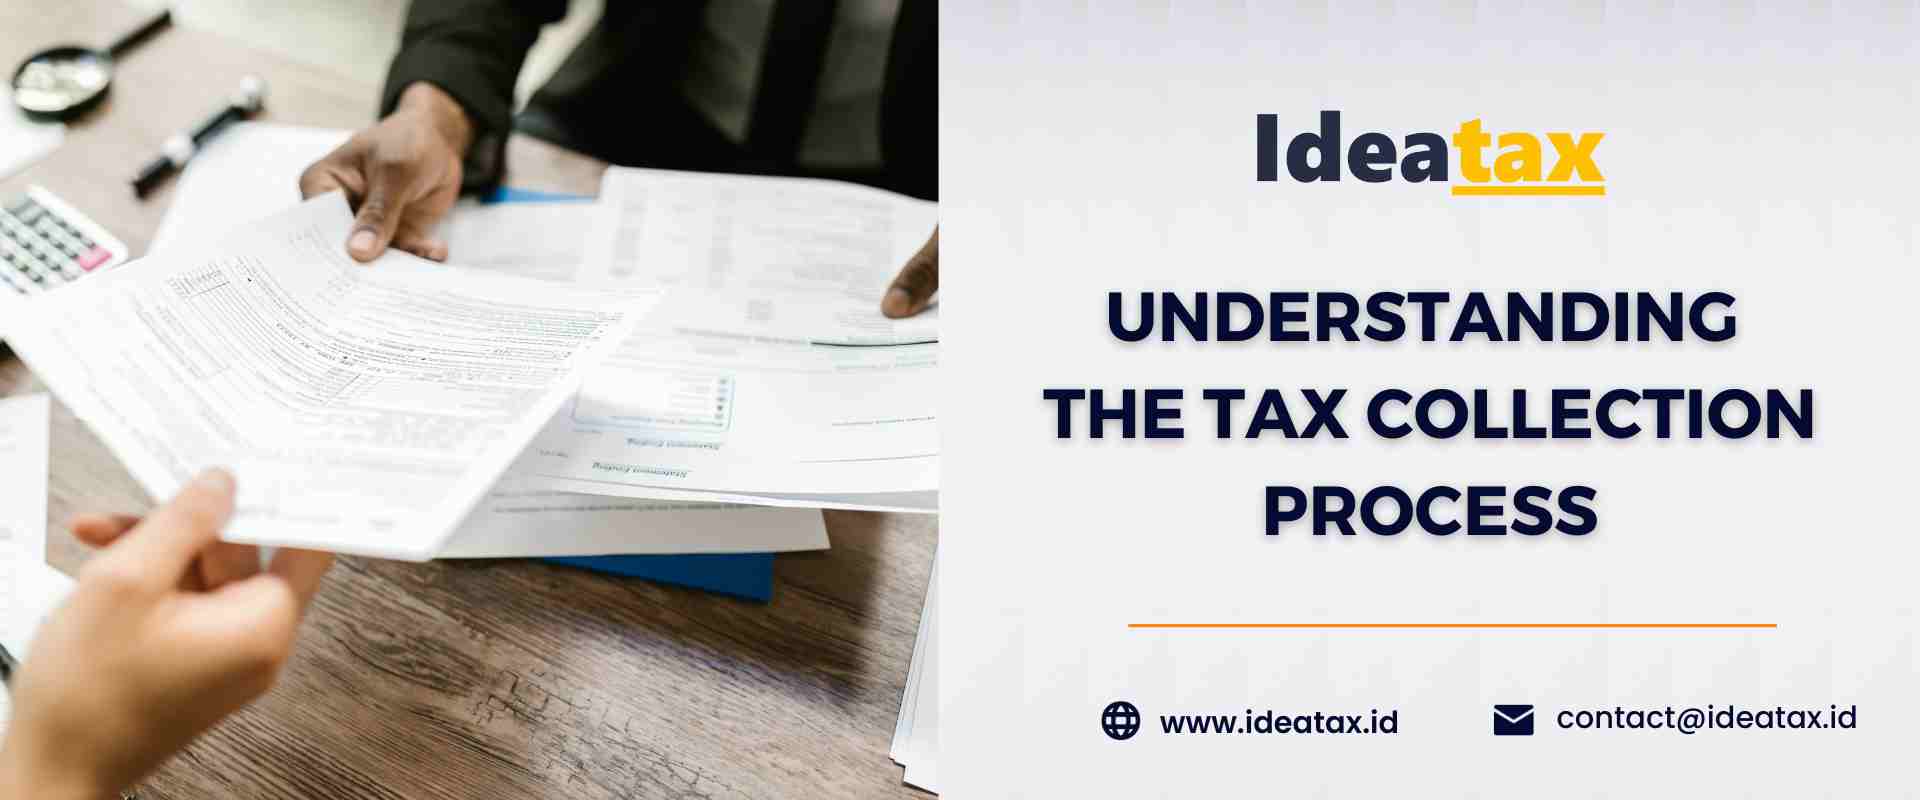 Understanding the Tax Collection Process